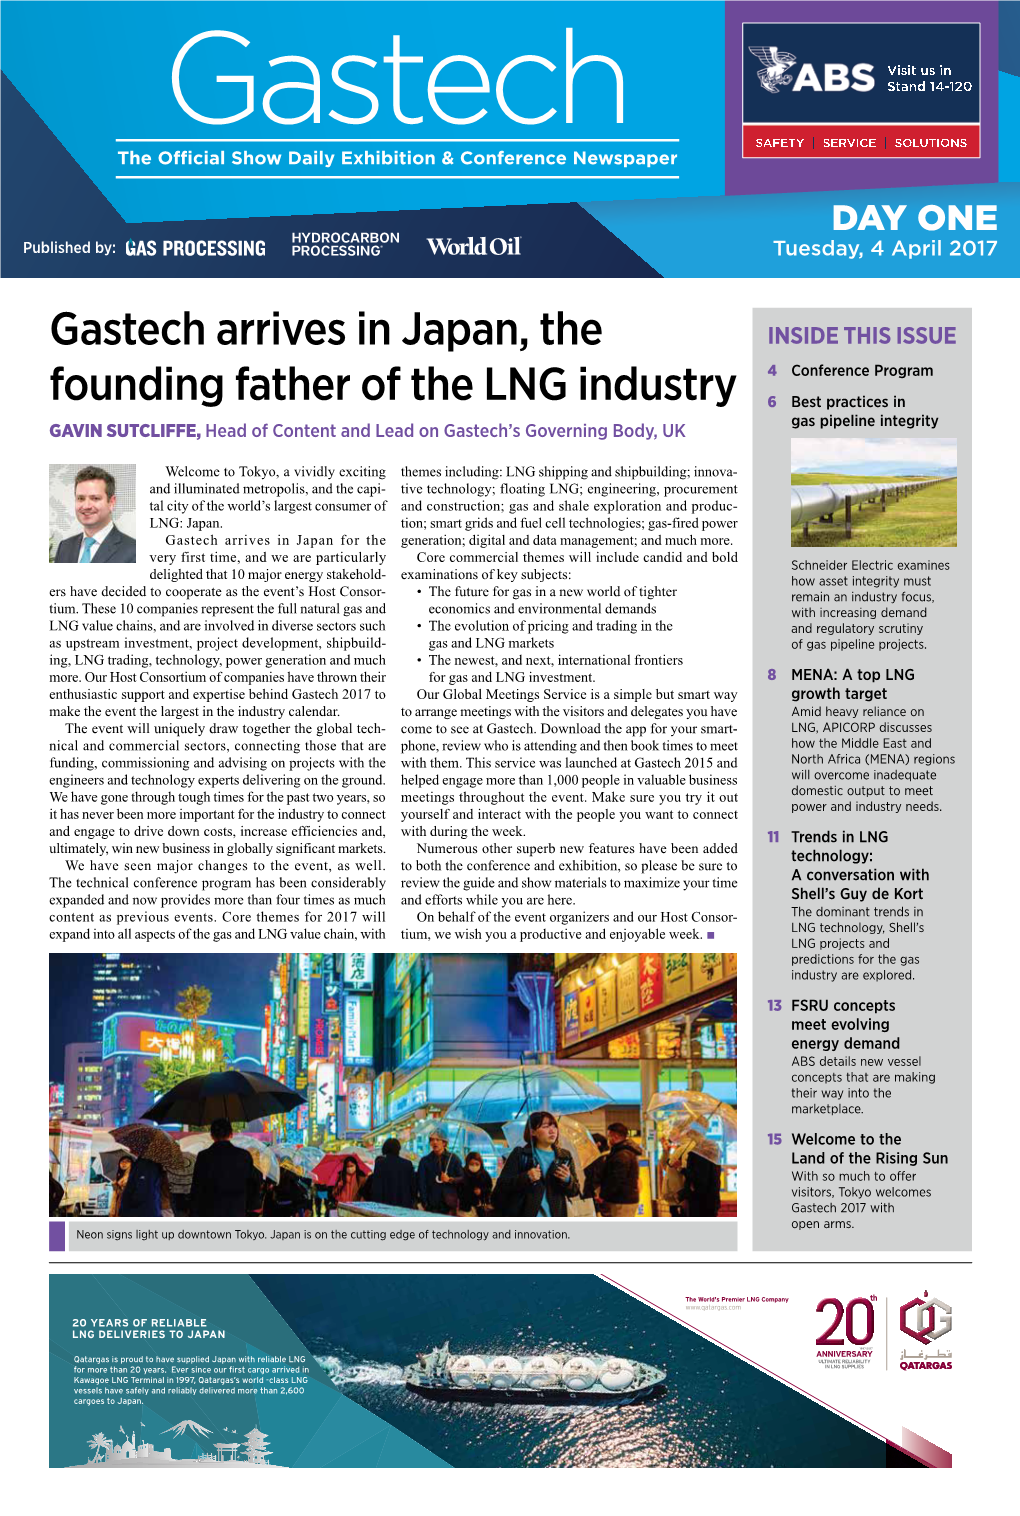 Gastech Arrives in Japan, the Founding Father of the LNG Industry